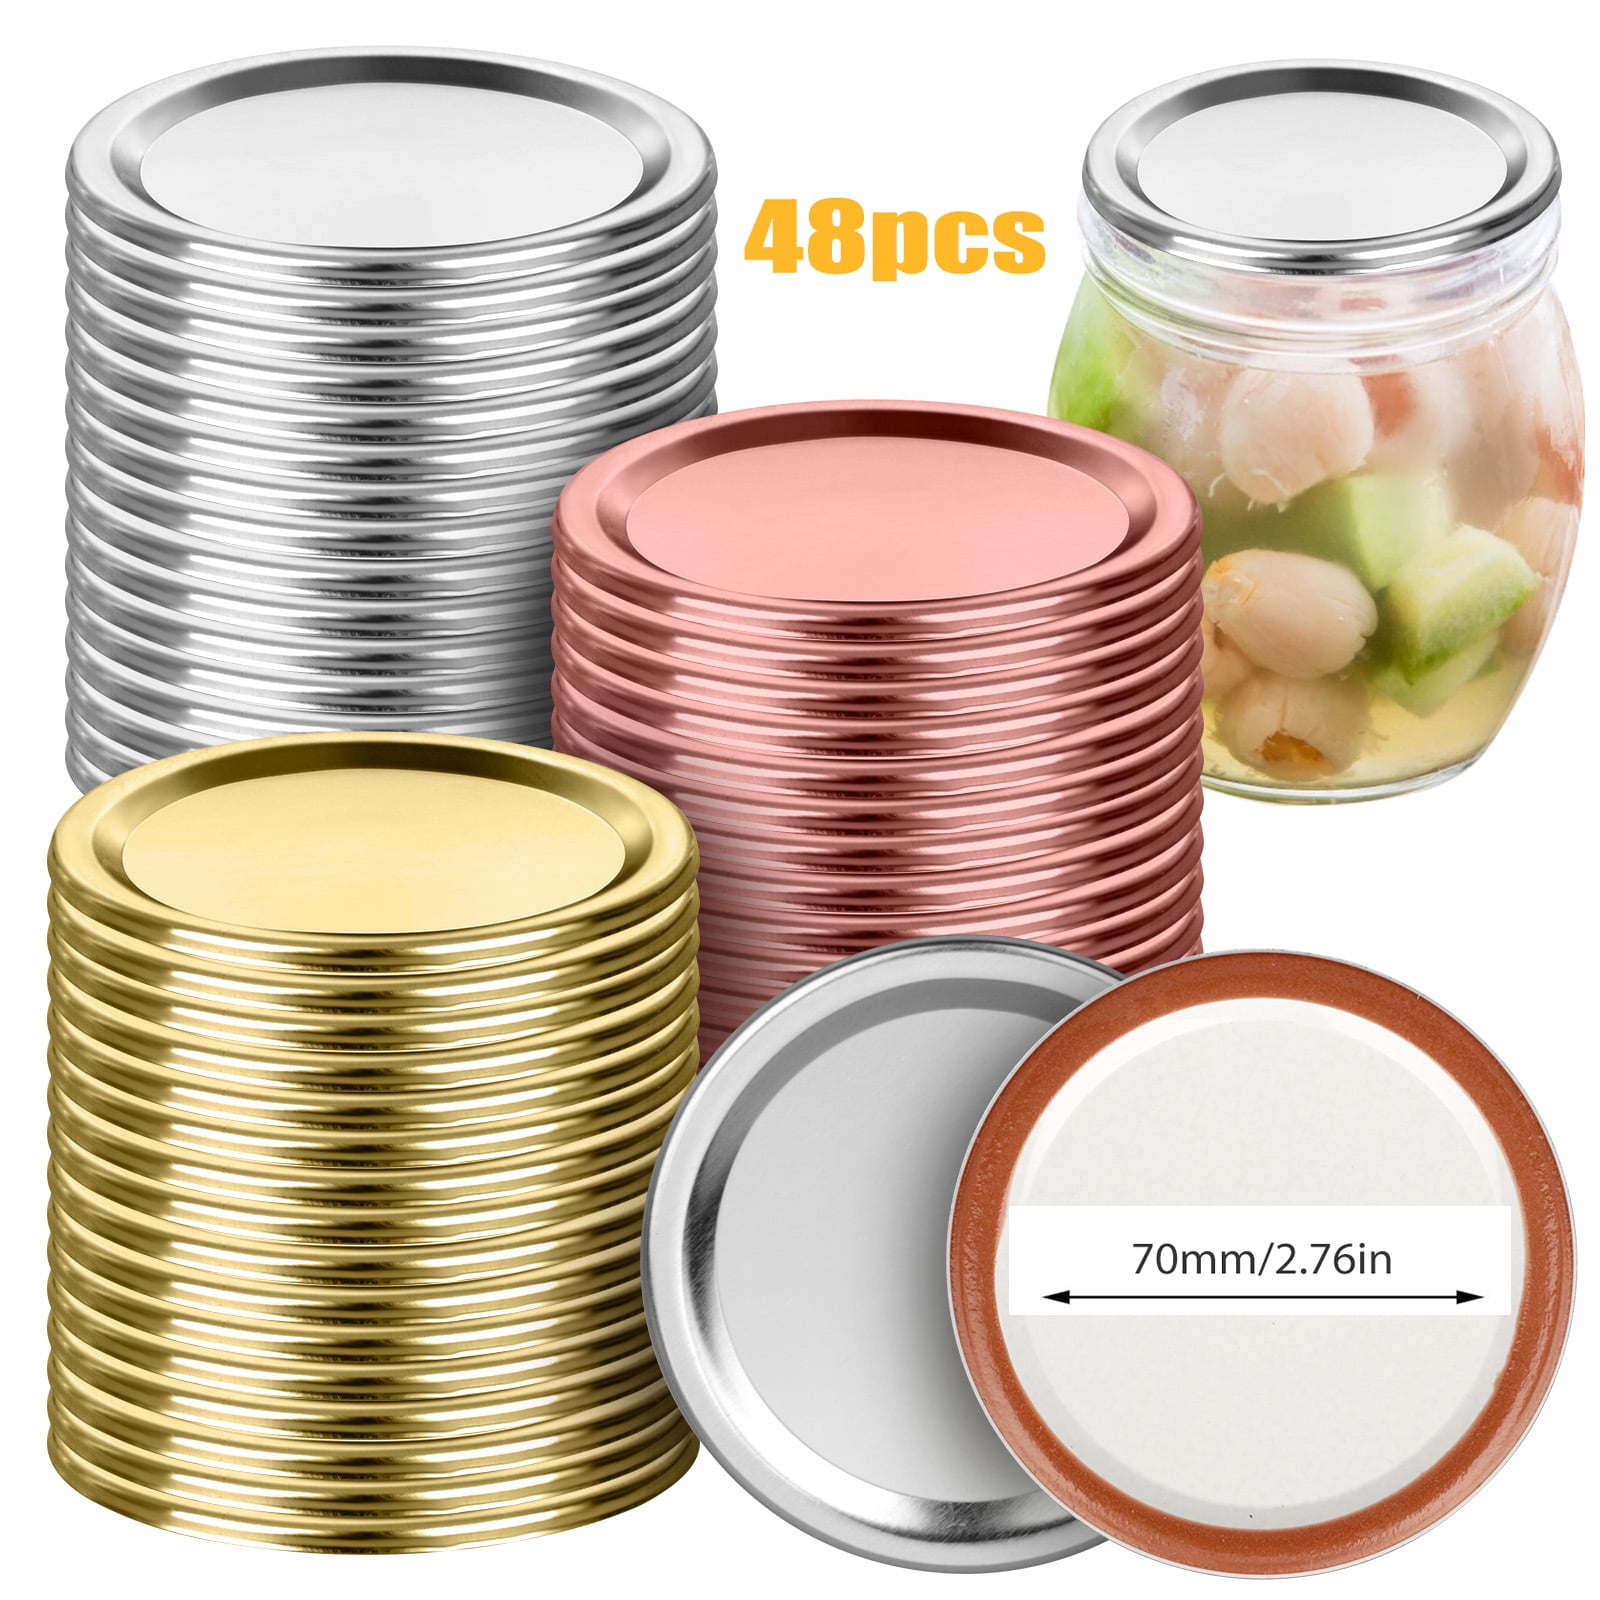 Mason Jar Lids Canning Lids Canning Lids Regular Mouth With Silicone Rings Anti-Scratch Resistant Surface Include 24 Gold Regular Lids and 24 Gold Regular Bands, 70mm 